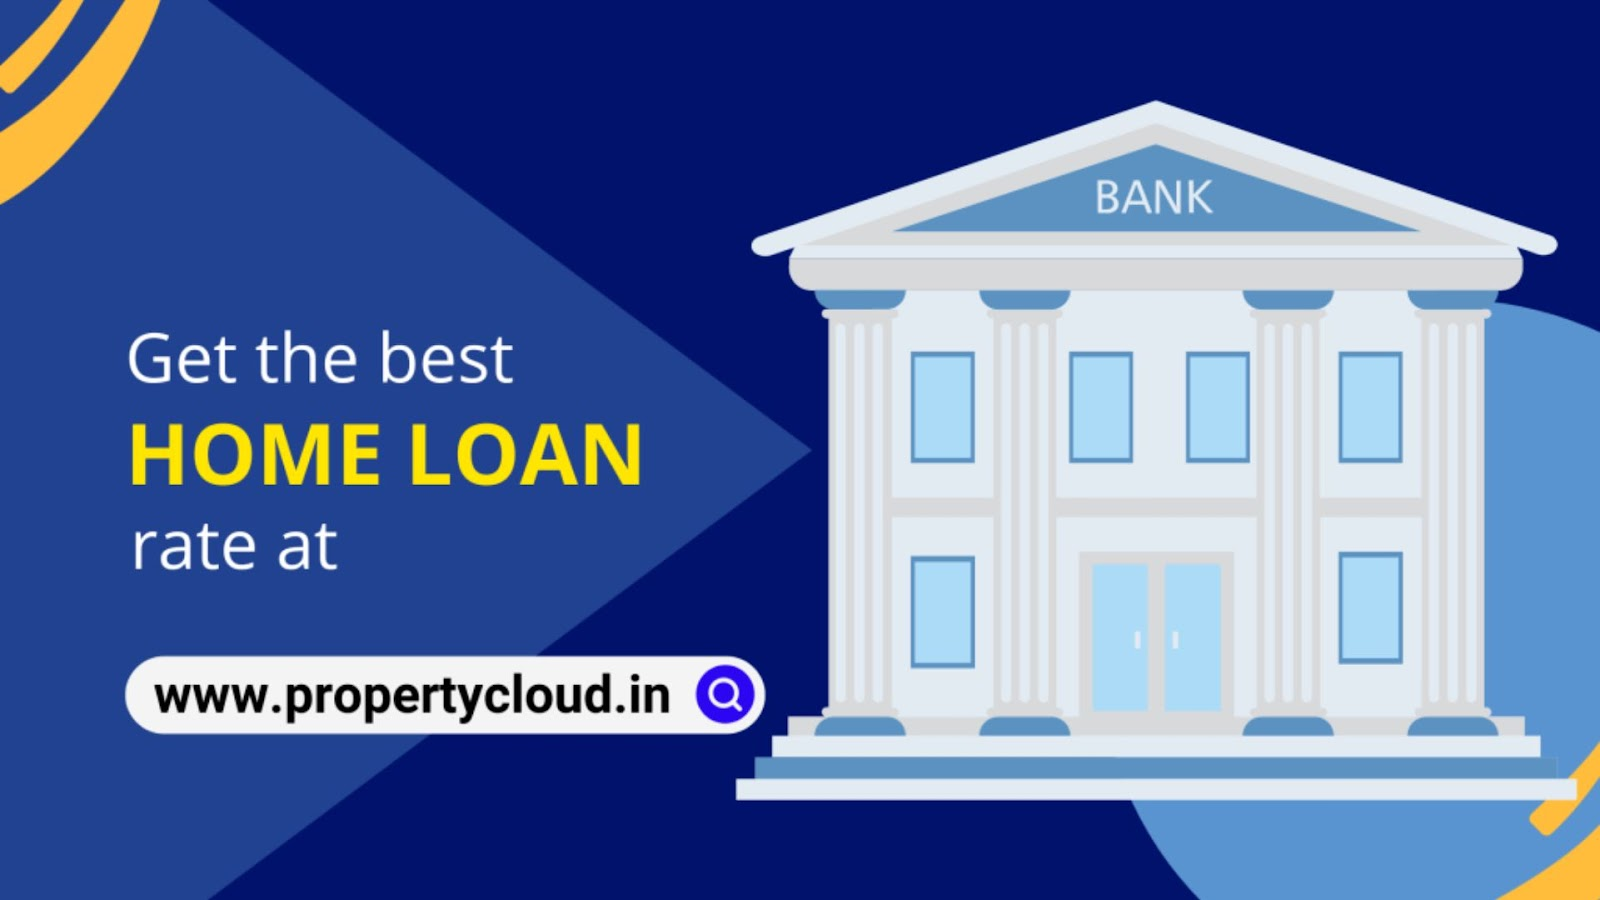 Reach out to PropertyCloud’s loan experts for easy-to-use home-buying assistance.